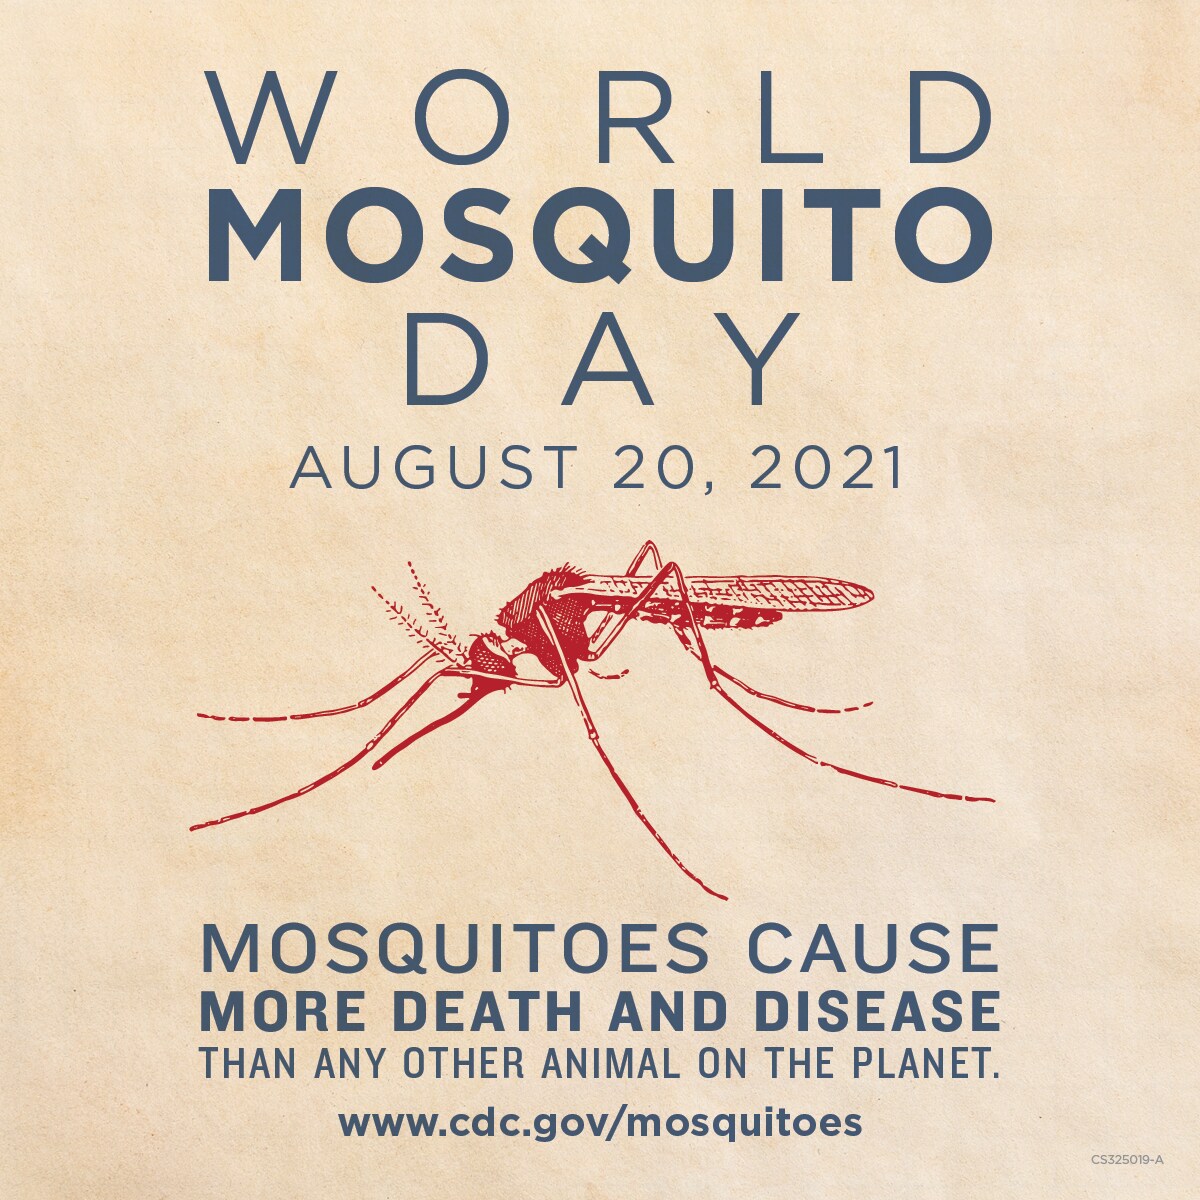 World Mosquito Day August 20, 2021 - Mosquitoes cause more death & disease than any other animal on the planet. www.cdc.gov/mosquitoes